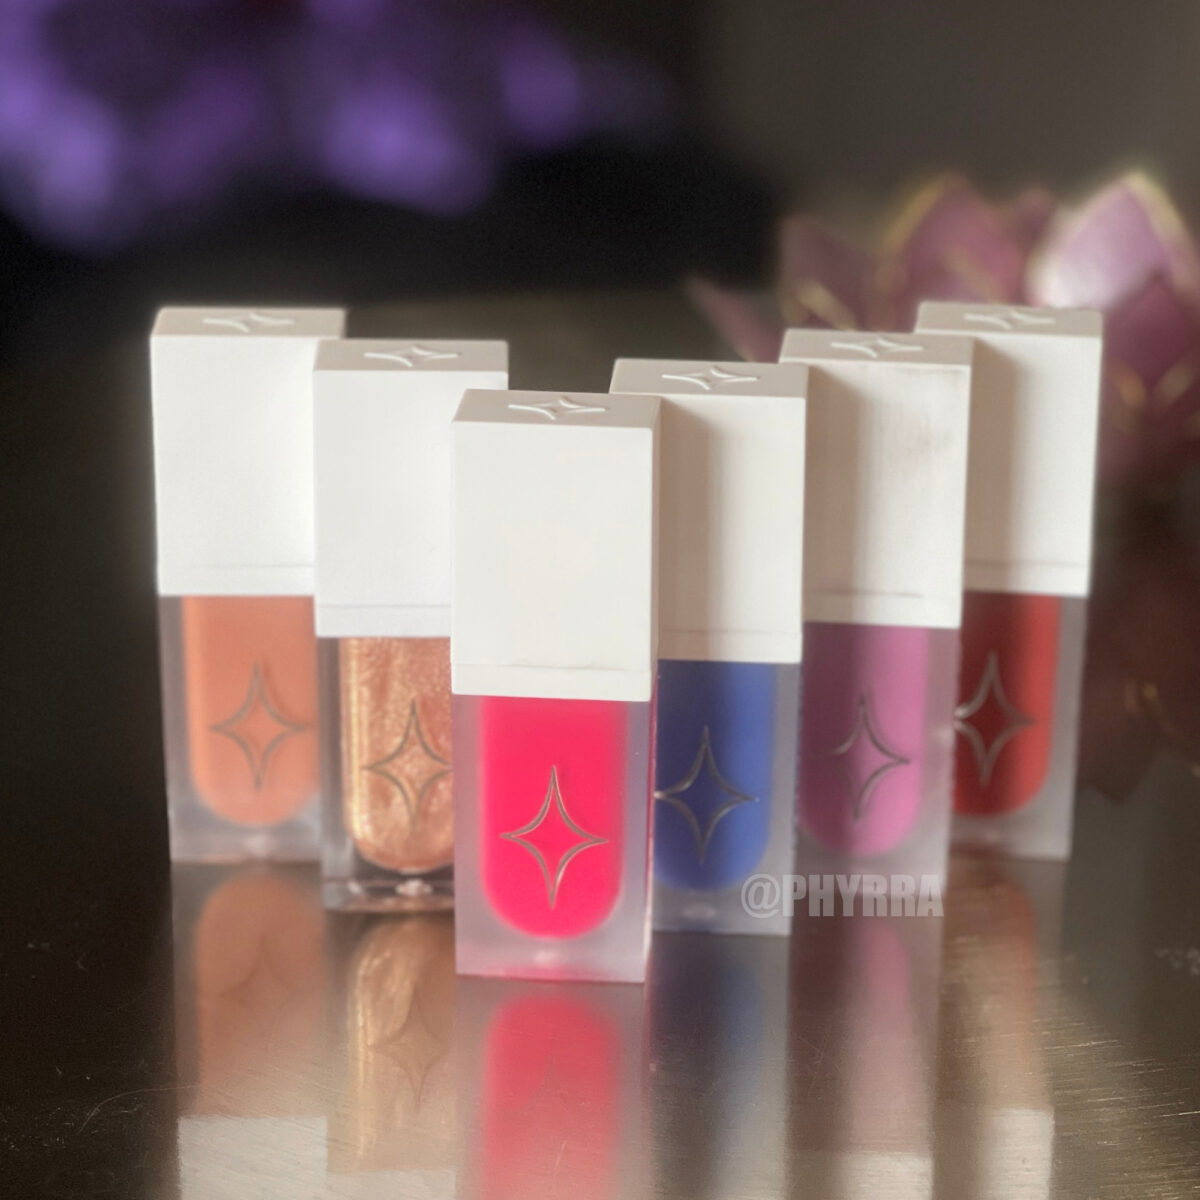 Half-Magic Mouth Cloud Soft Matte Lip Creams Review and Swatches on fair skin